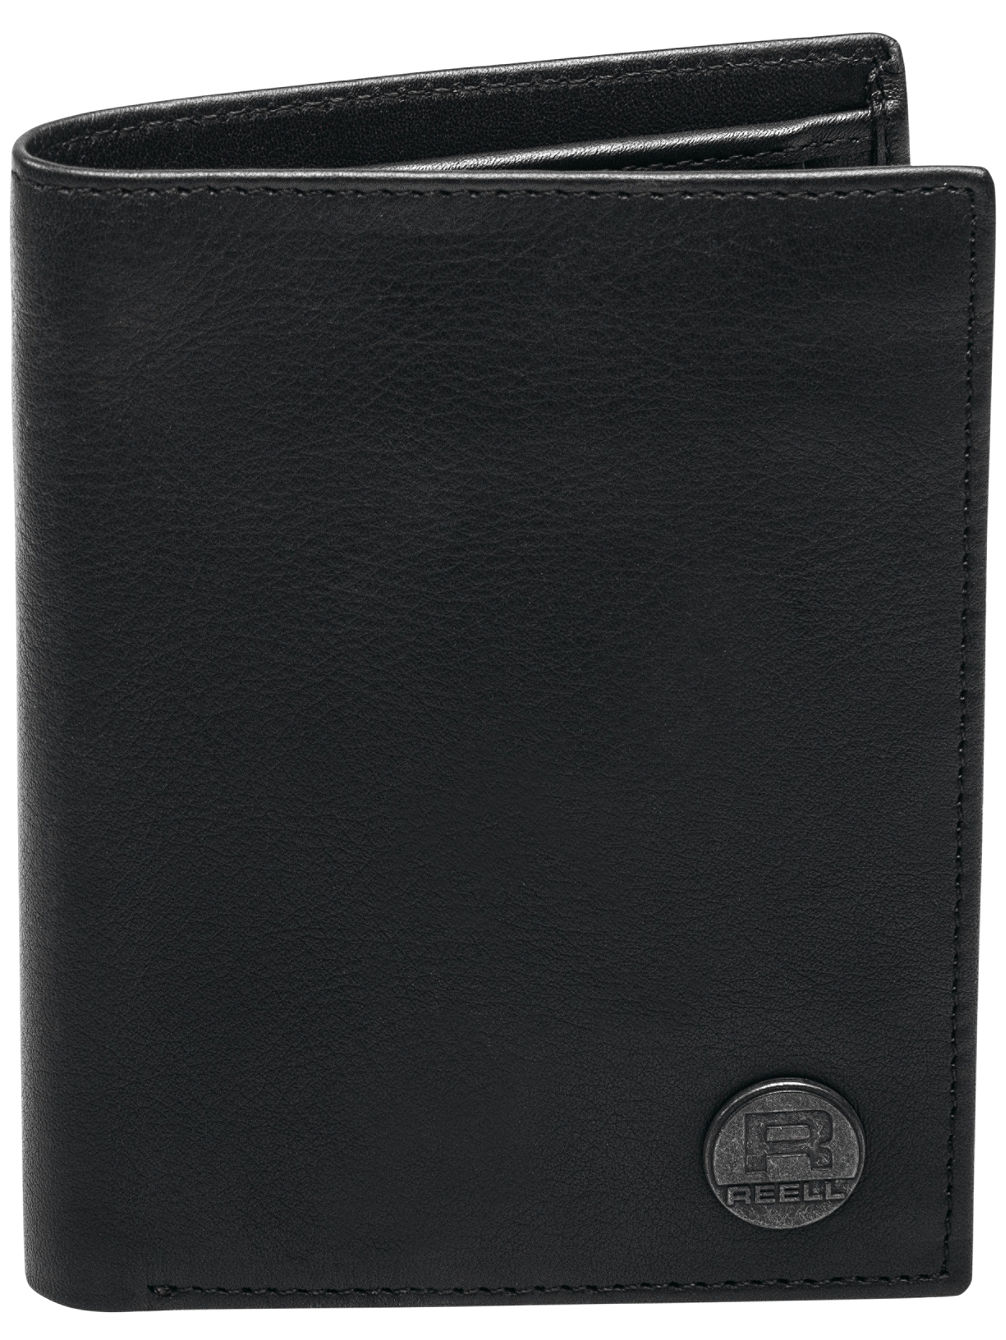 Clean Leather Wallet